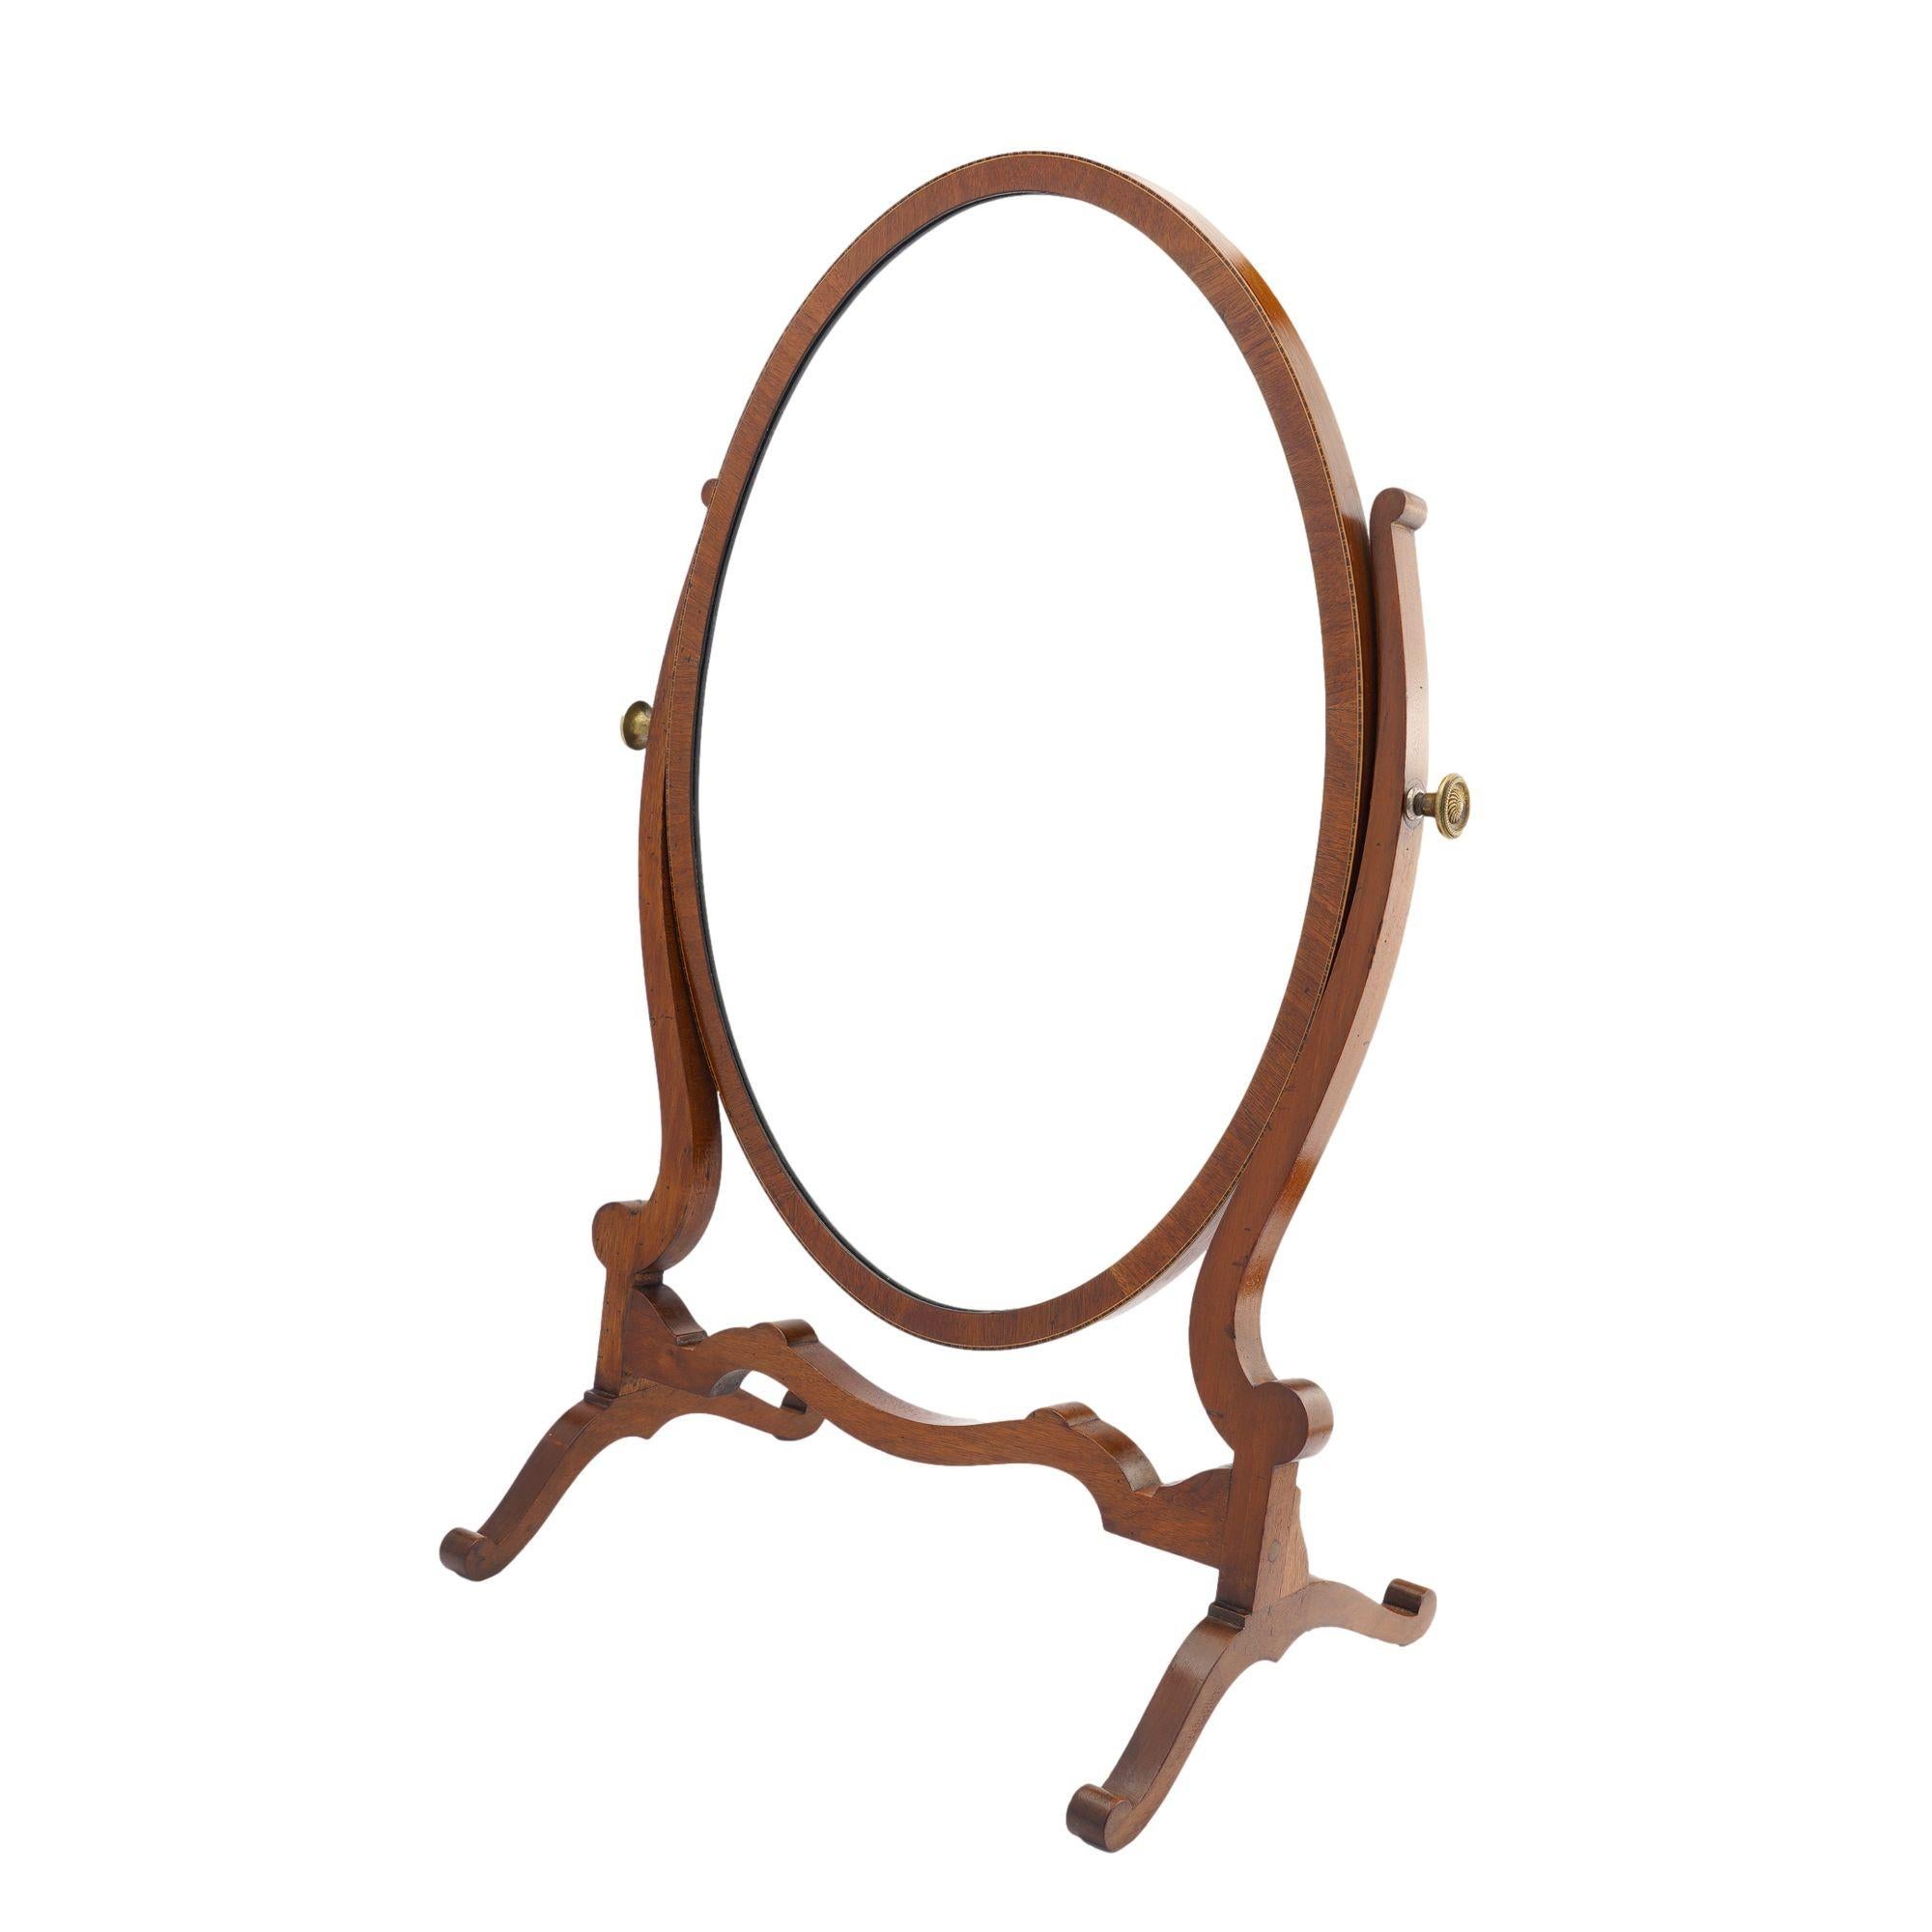 Oval tabletop swinger mirror in mahogany with delicate stringing around the mirror frame. Mirror is mounted on a sculptural mahogany stand with brass tilter knobs. 
England, 1800-25.